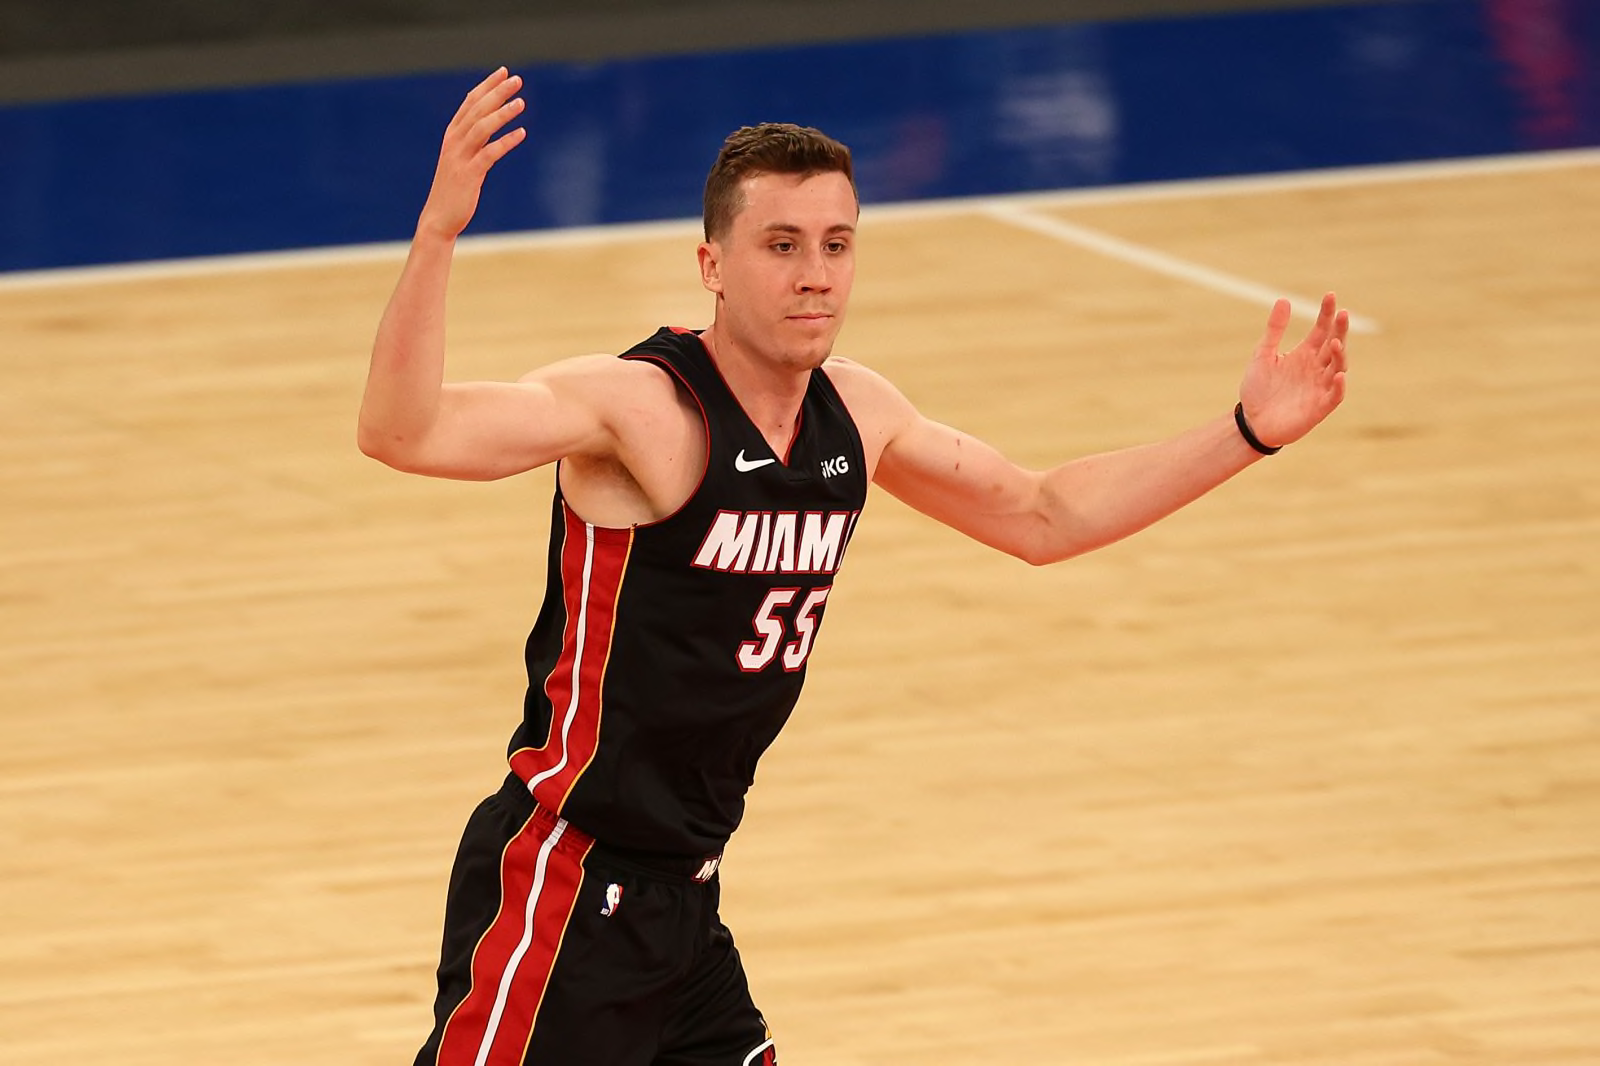 Denver Nuggets: How would Duncan Robinson fit? - Nugg Love